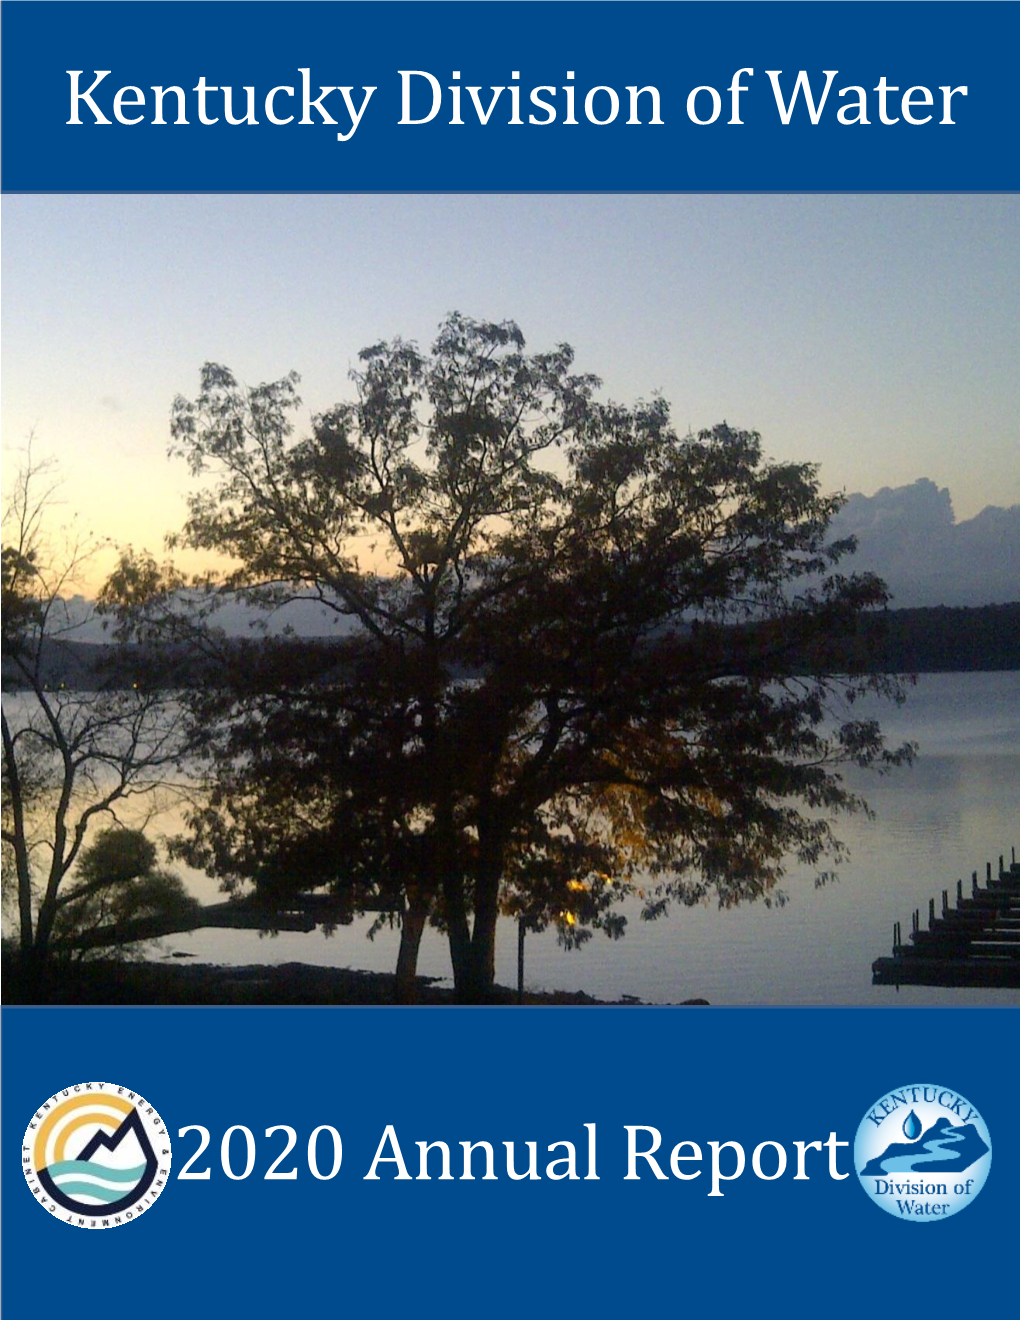 Kentucky Division of Water 2020 Annual Report